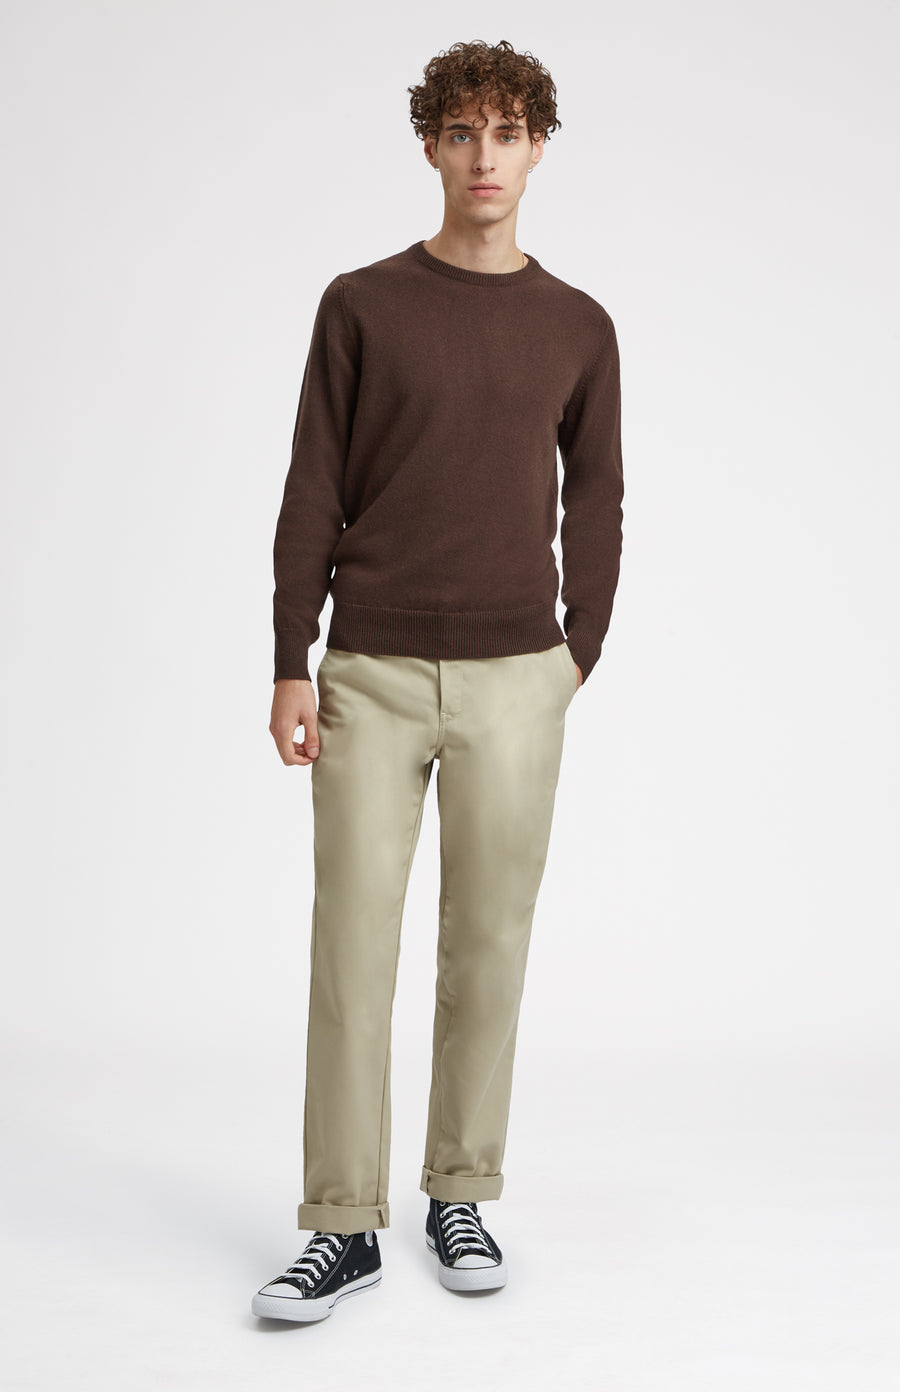 Men's 4 ply Round Neck cashmere jumper in Chocolate on model full length - Pringle of Scotland